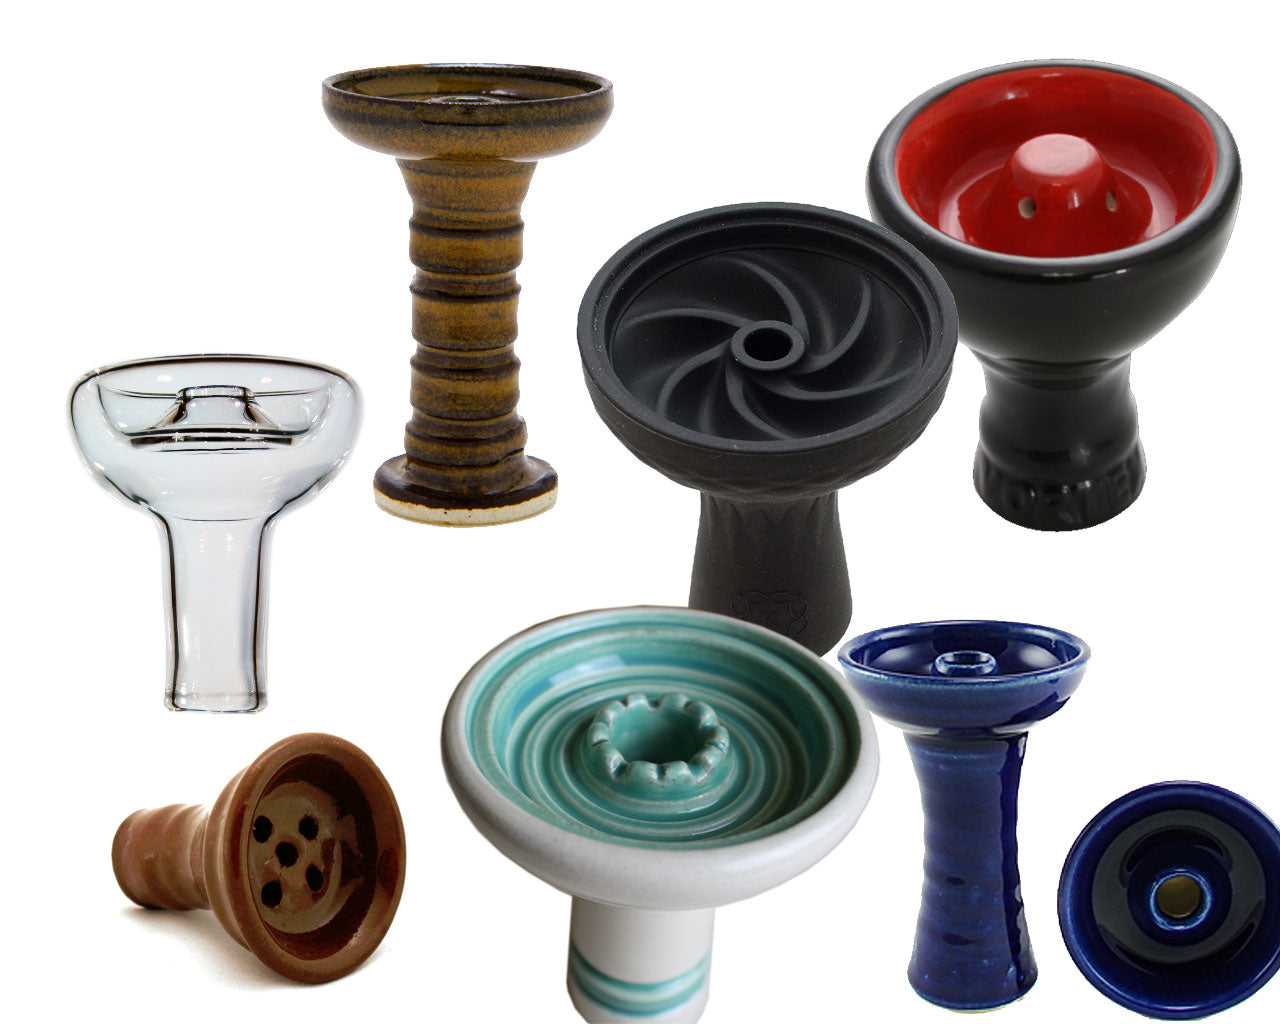 A Brief Overview of Hookah Bowls